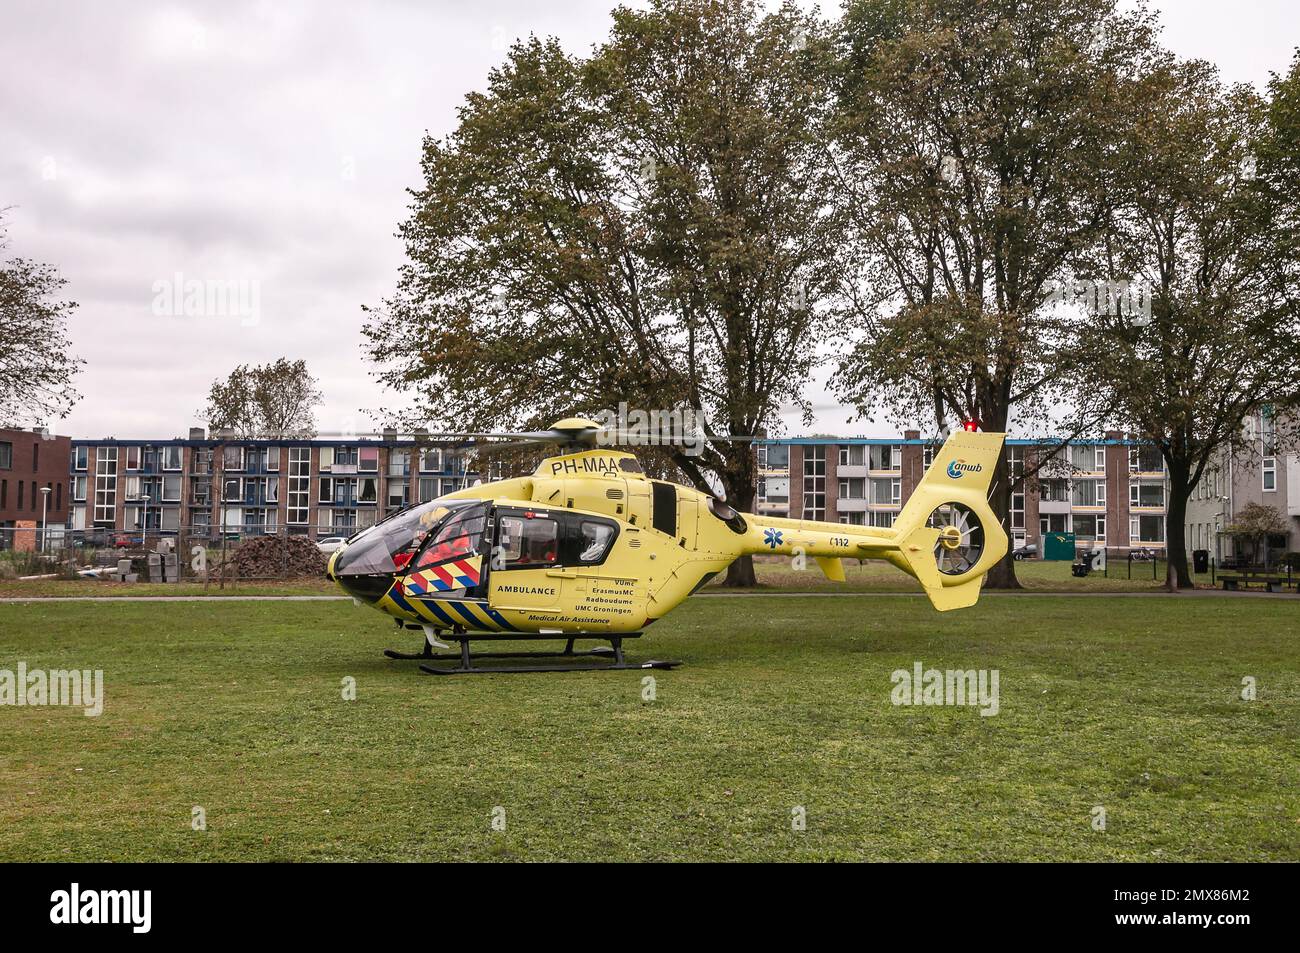 Dutch ANWB trauma helicopter landed on a grass field Stock Photo